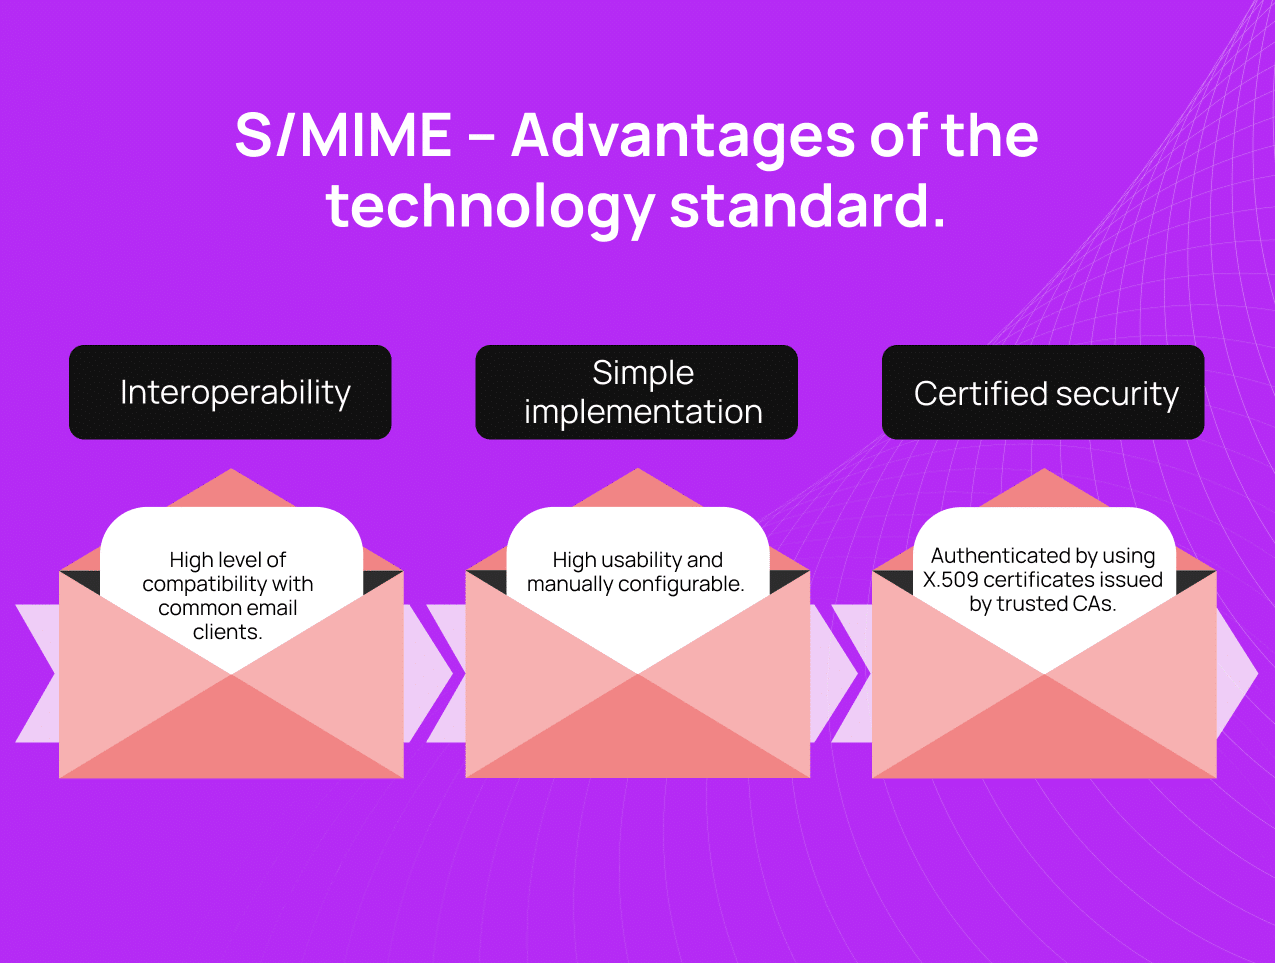 The infographic shows S/MIME and the benefits of interoperability, simple implementation and CAs illustrated on three letters in front of a purple background.